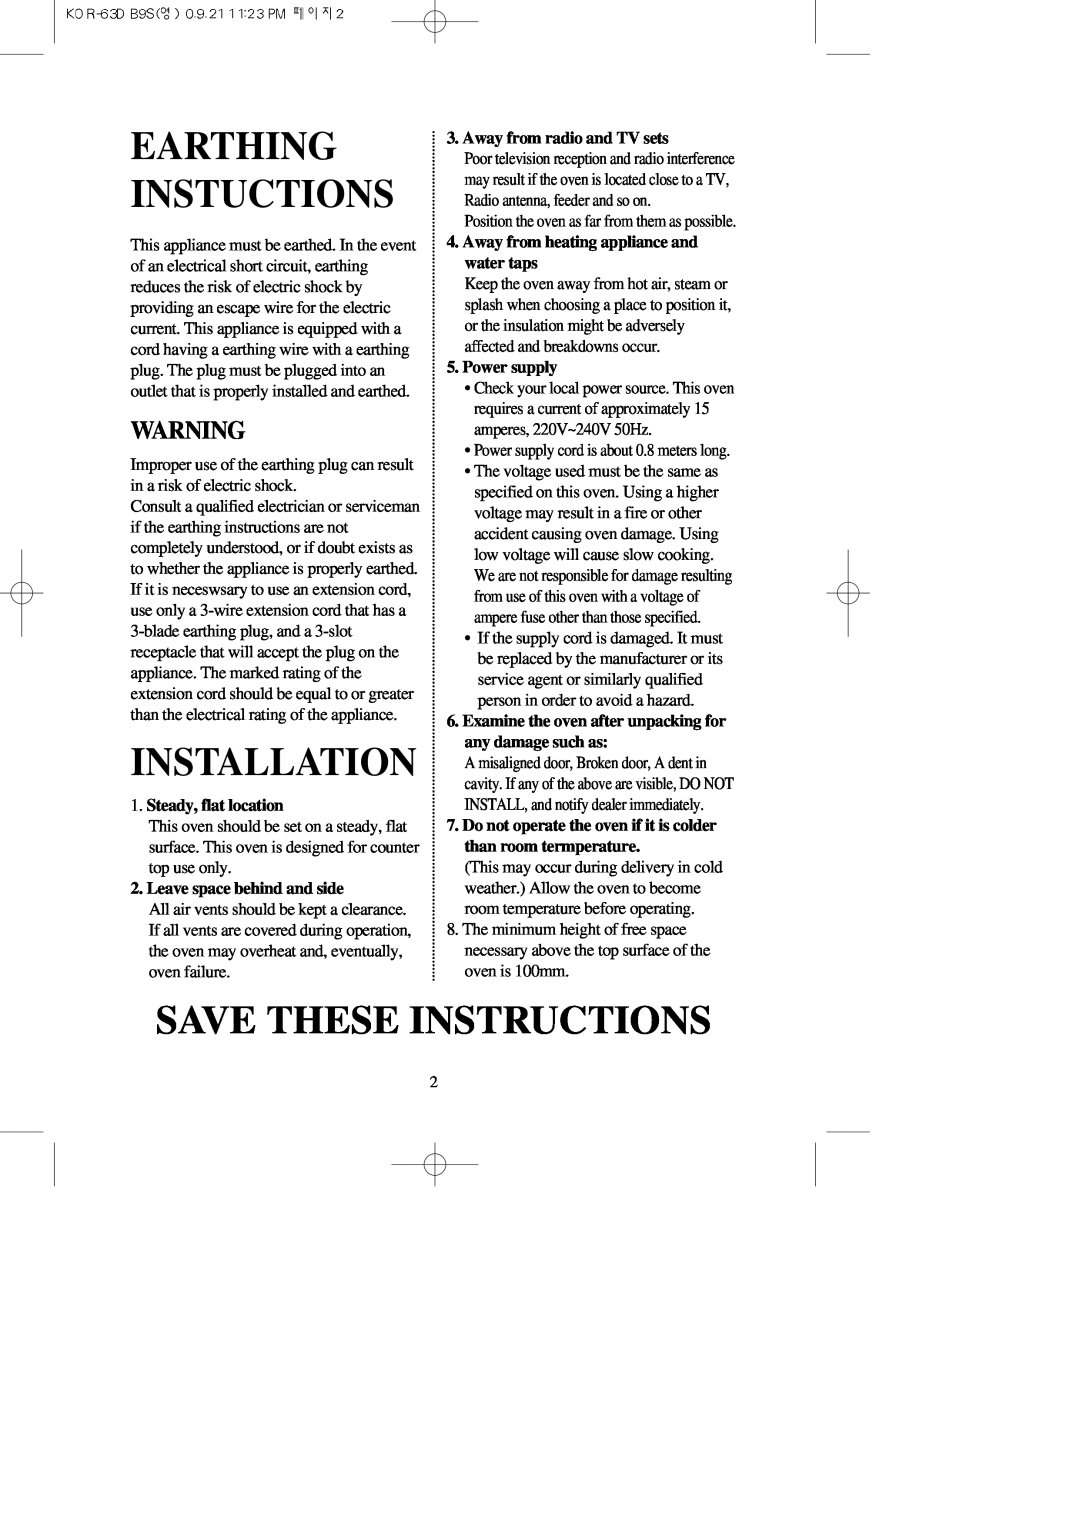 Daewoo KOR-63DB9S manual Earthing Instuctions, Installation, Save These Instructions, Steady, flat location, Power supply 